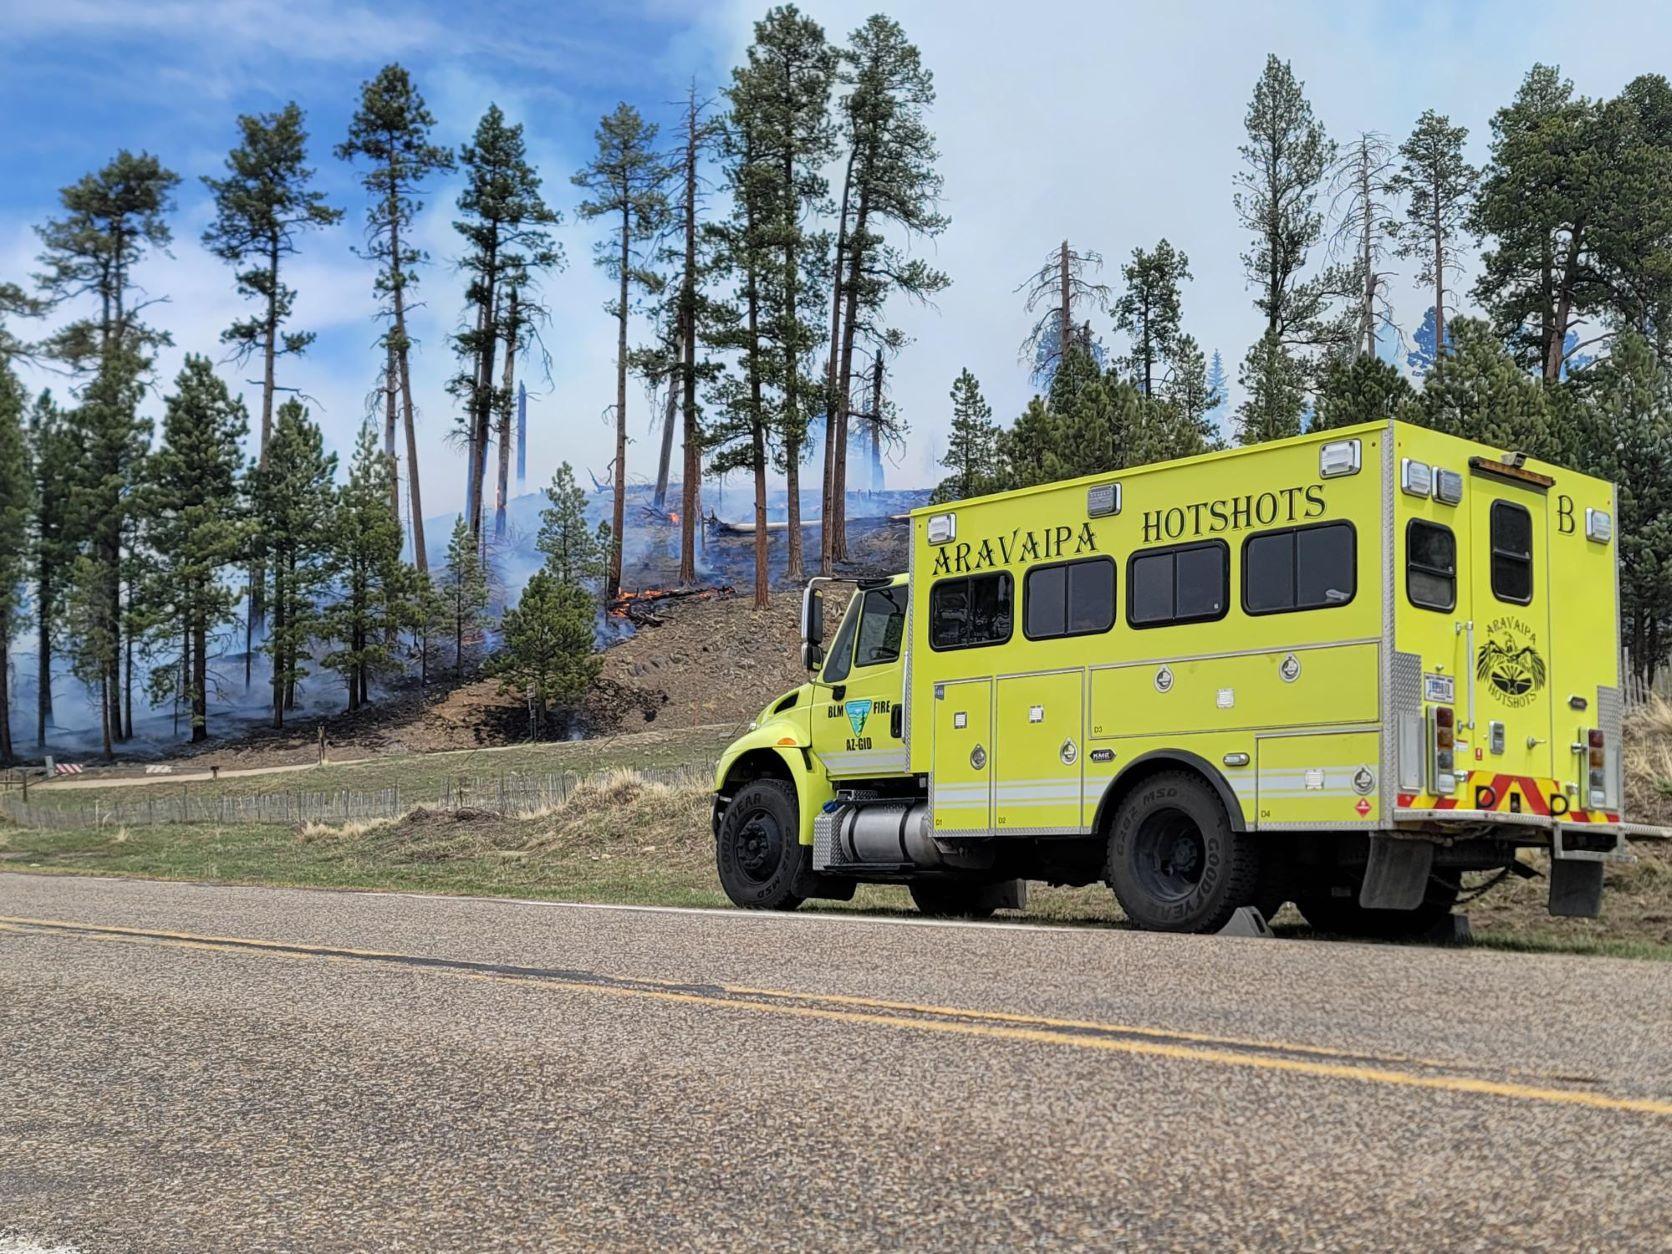 A crew transport vehicle in parked along a road with smoke and fire on a hill in the background